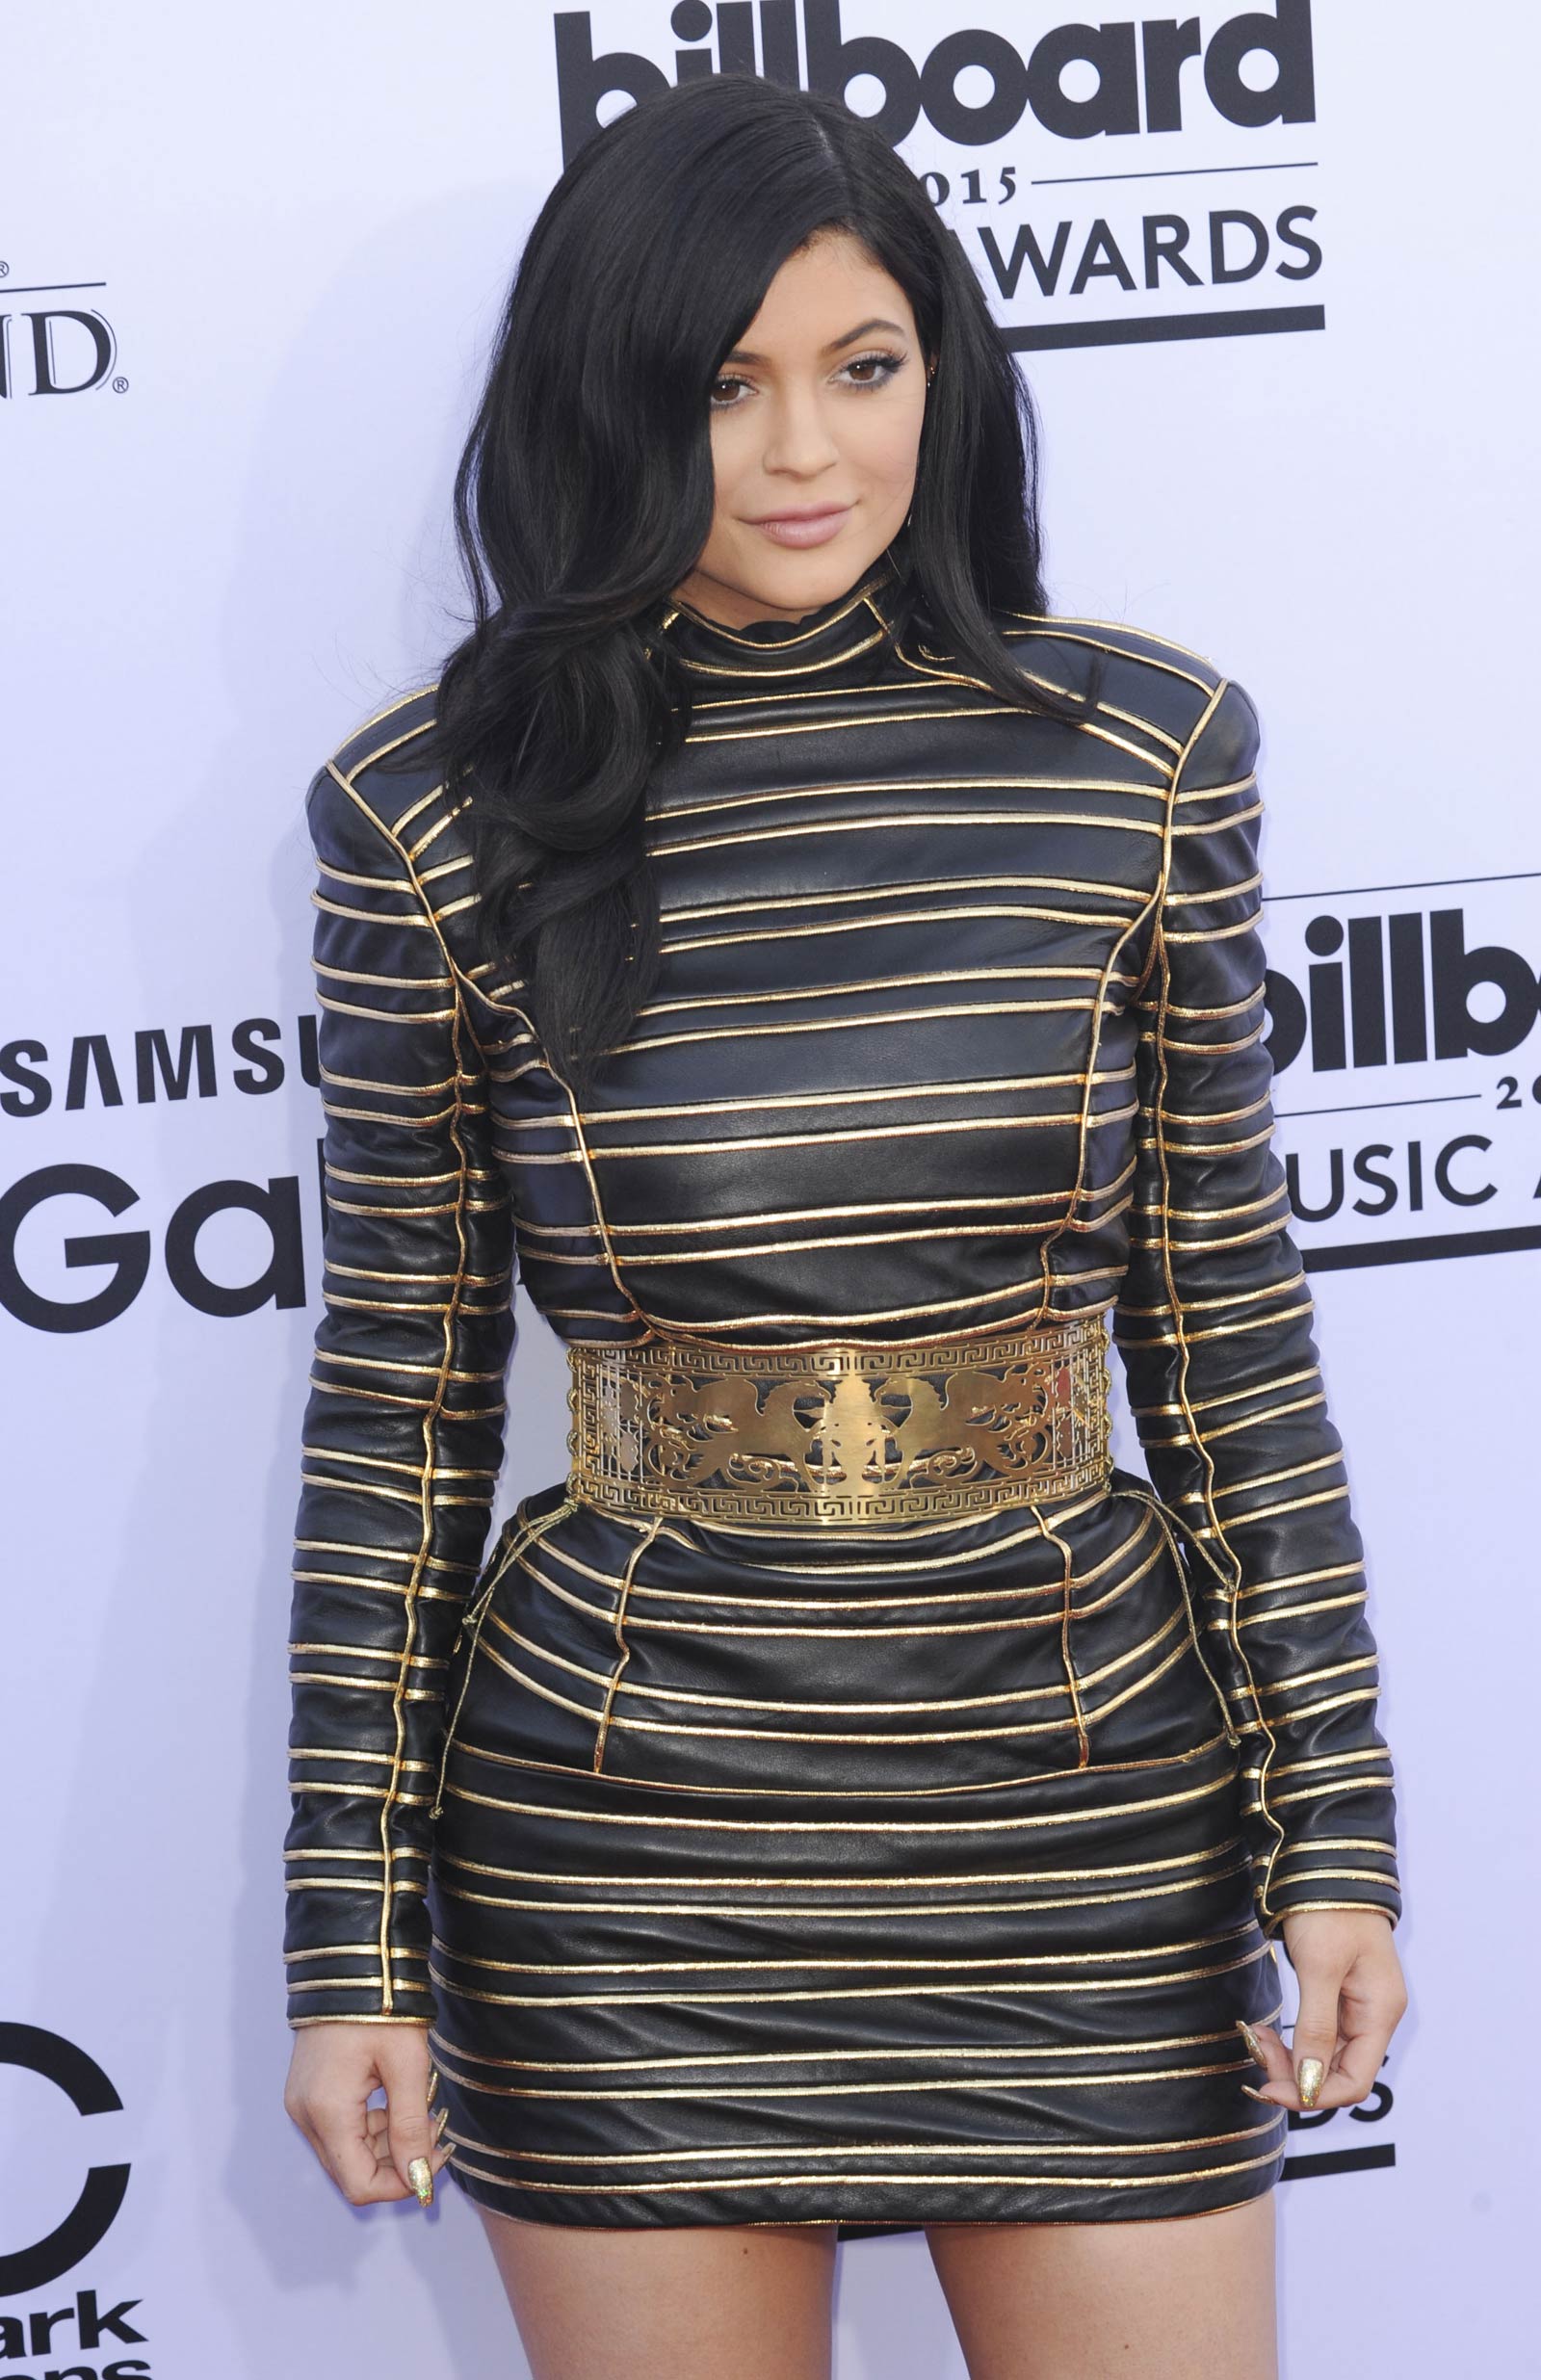 Kylie Jenner attends the 2015 Billboard Music Awards